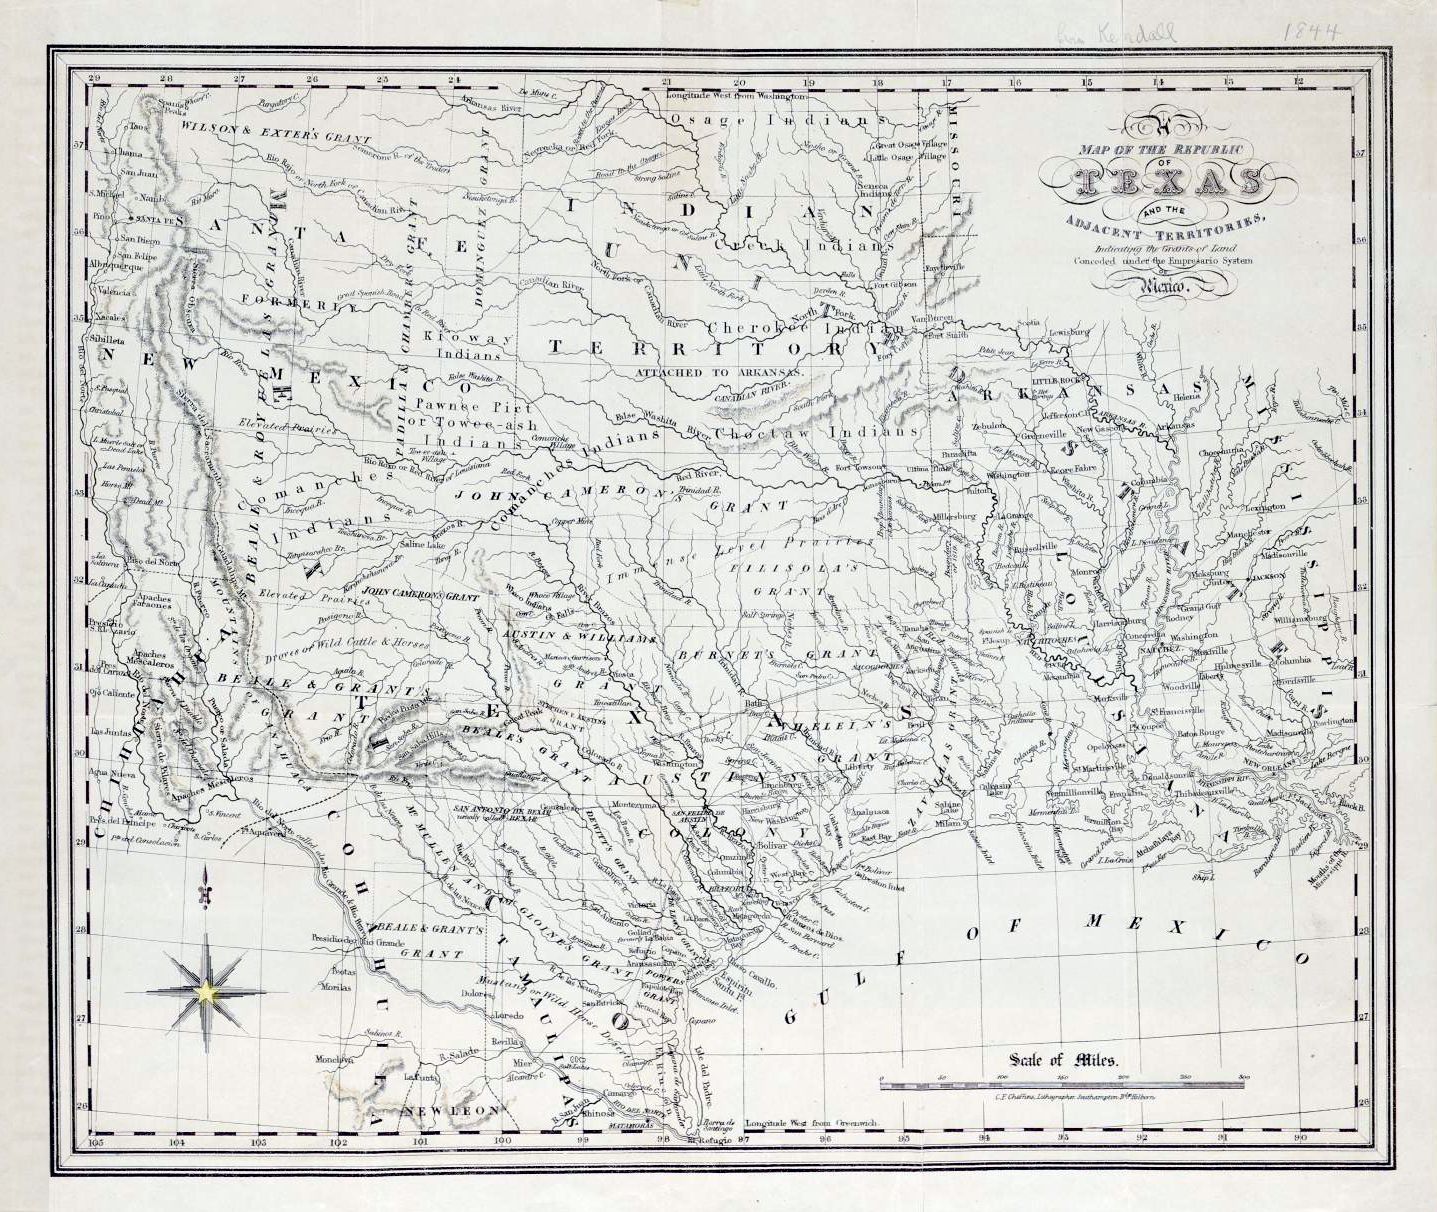 1845: Texas was once an Independent State Equal to the U.S.